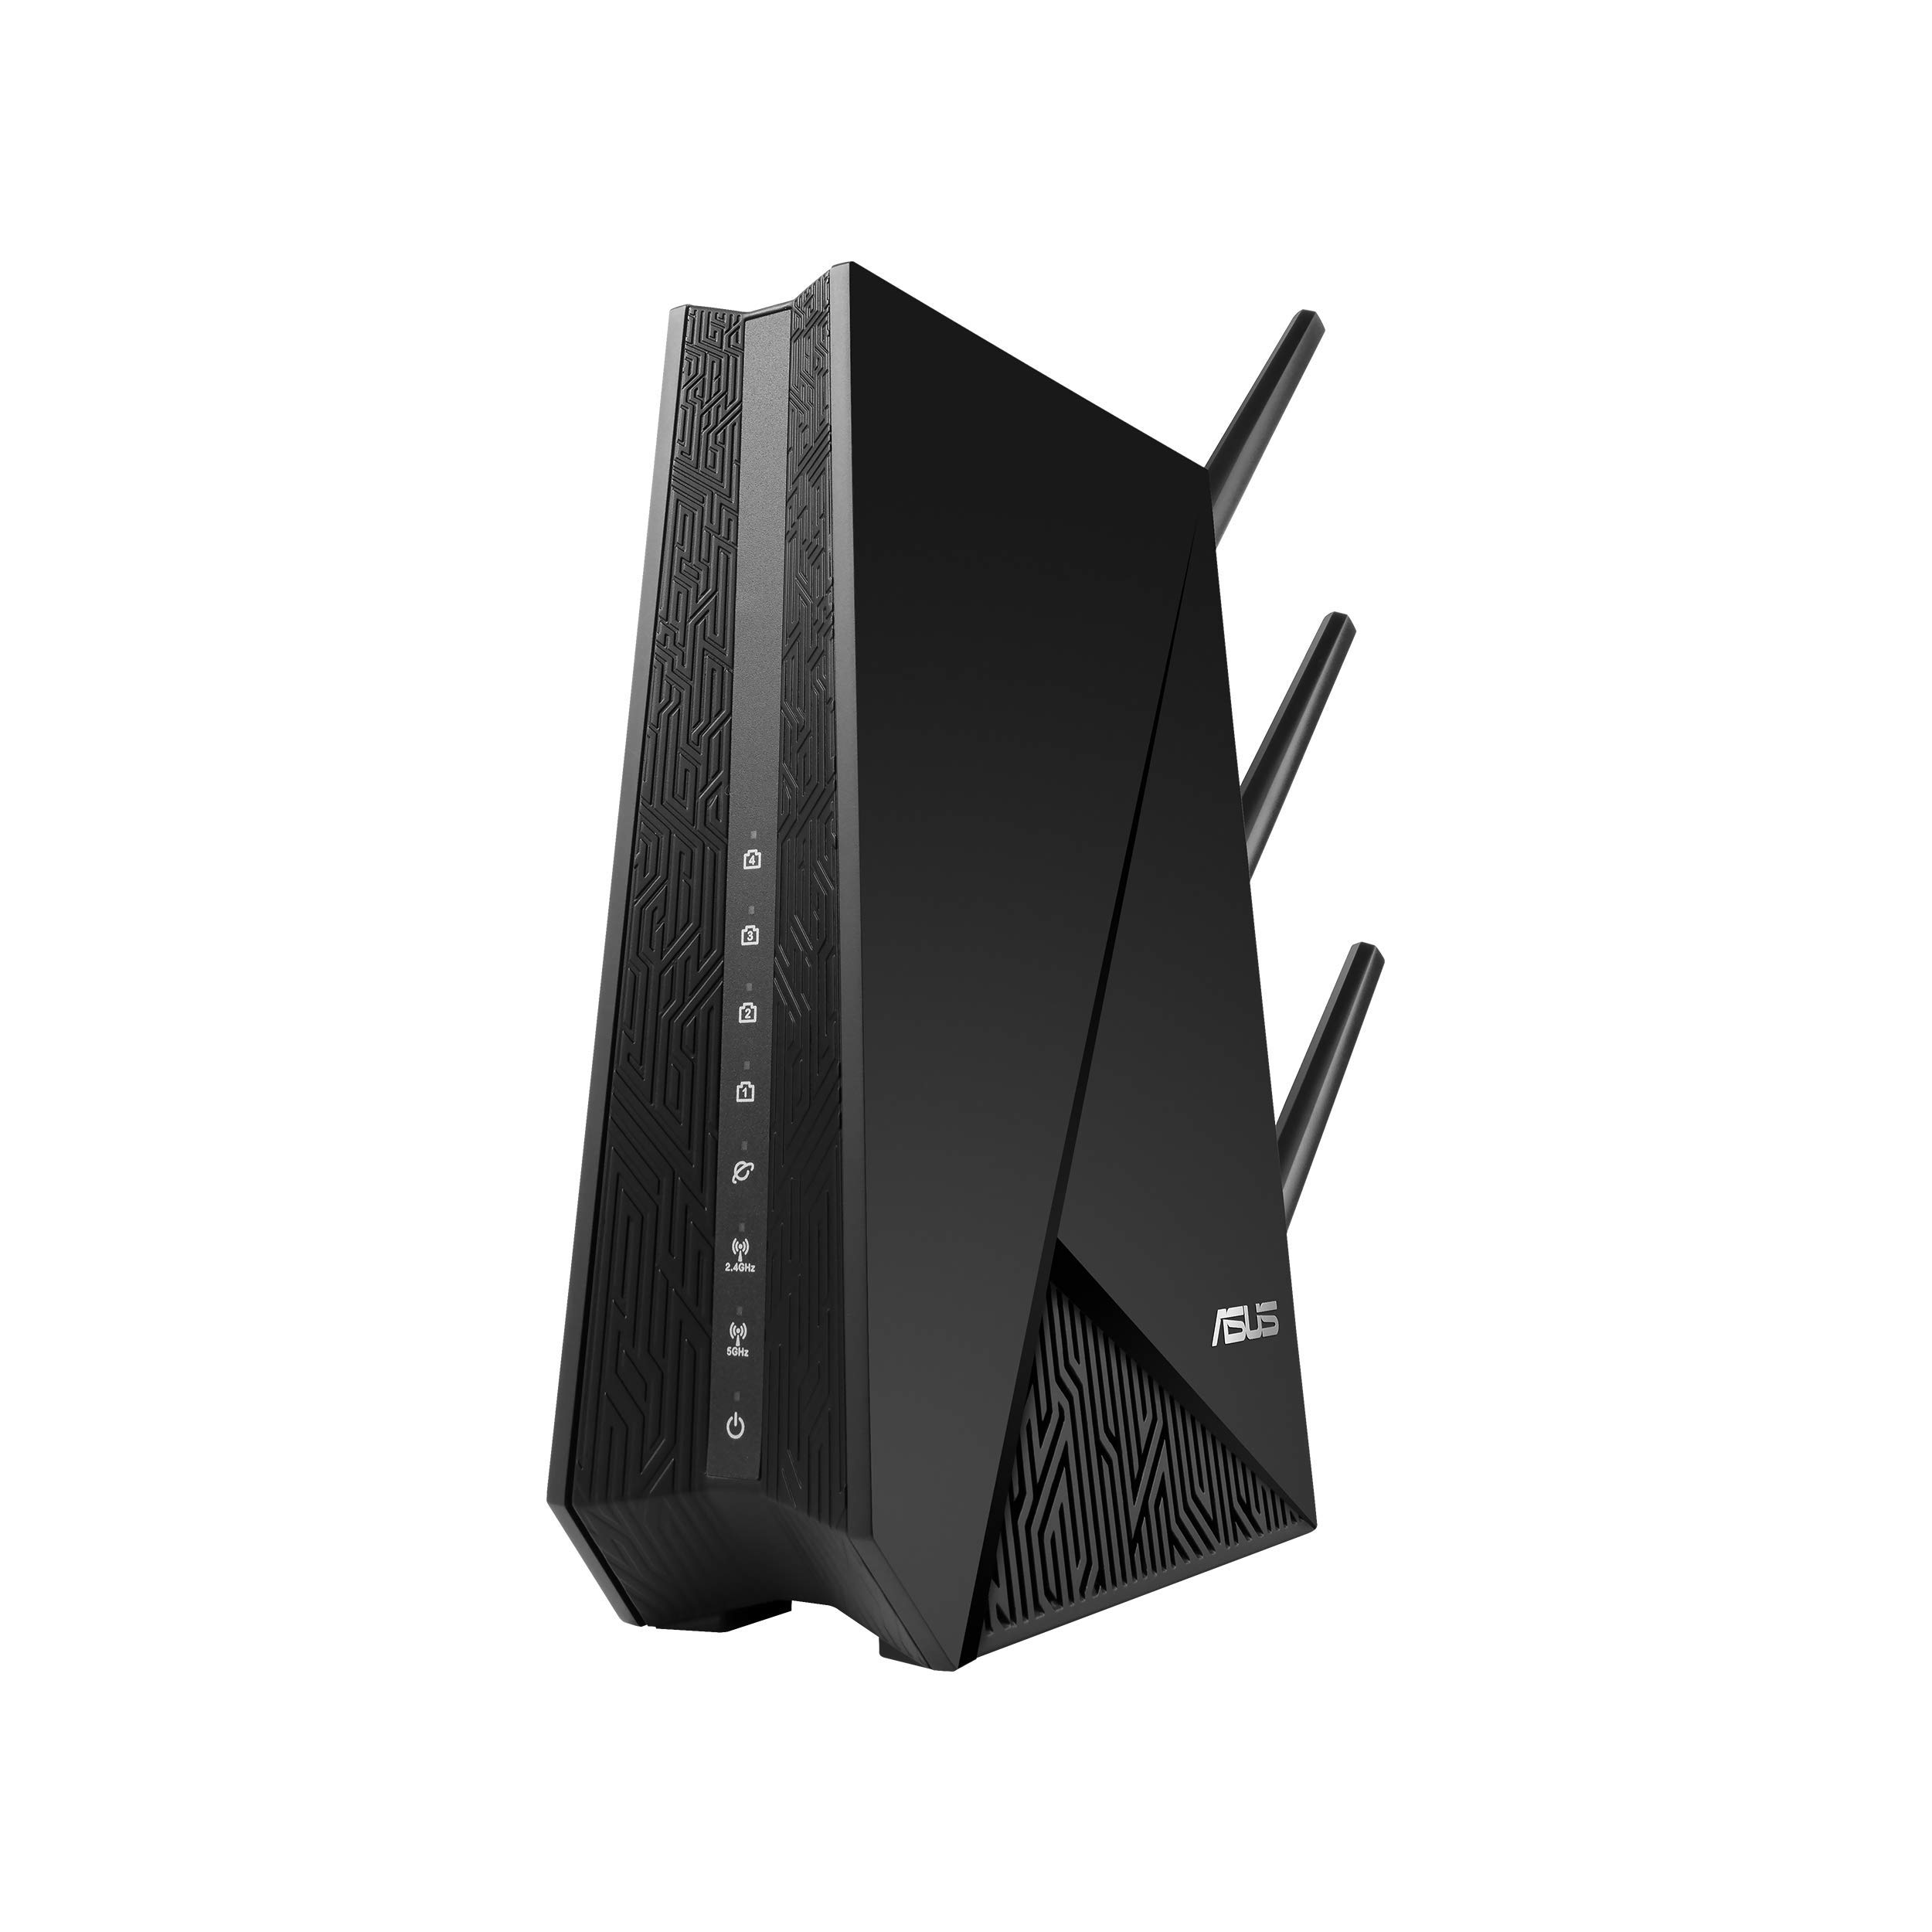 ASUS Dual Band WiFi Repeater & Range Extender (RP-AC1900) - Coverage Up to 3000 sq.ft, Wireless Signal Booster for Home, AiMesh Node, Easy Setup